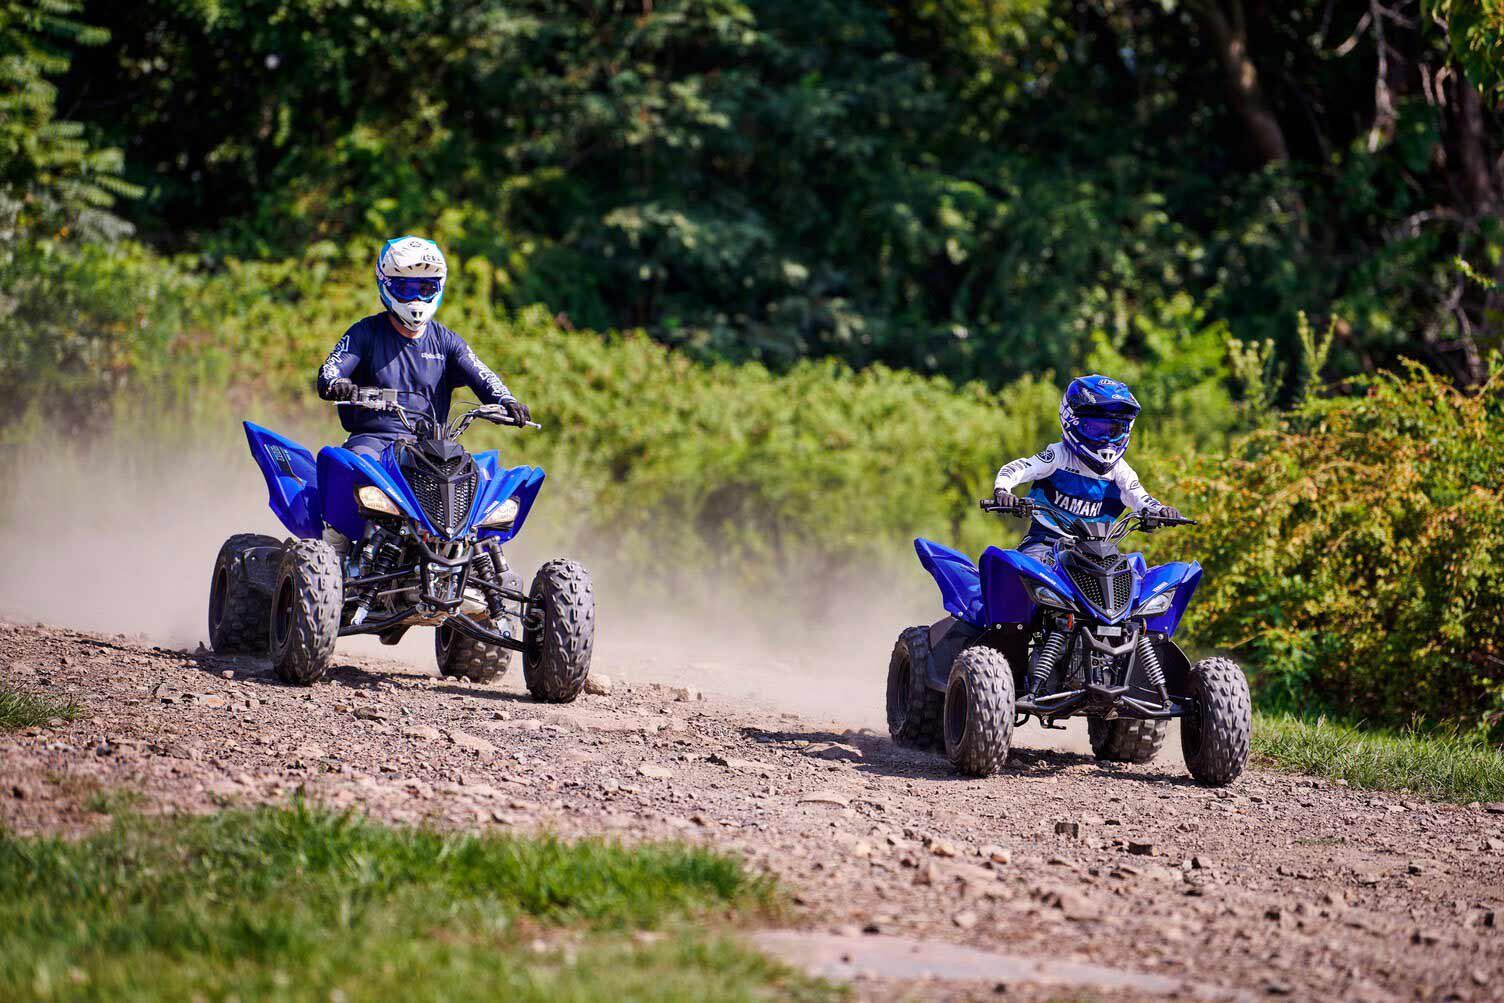 For the little ripper in your life, the 2022 Yamaha Raptor 90 is a gateway drug to full-on motocross rigs.